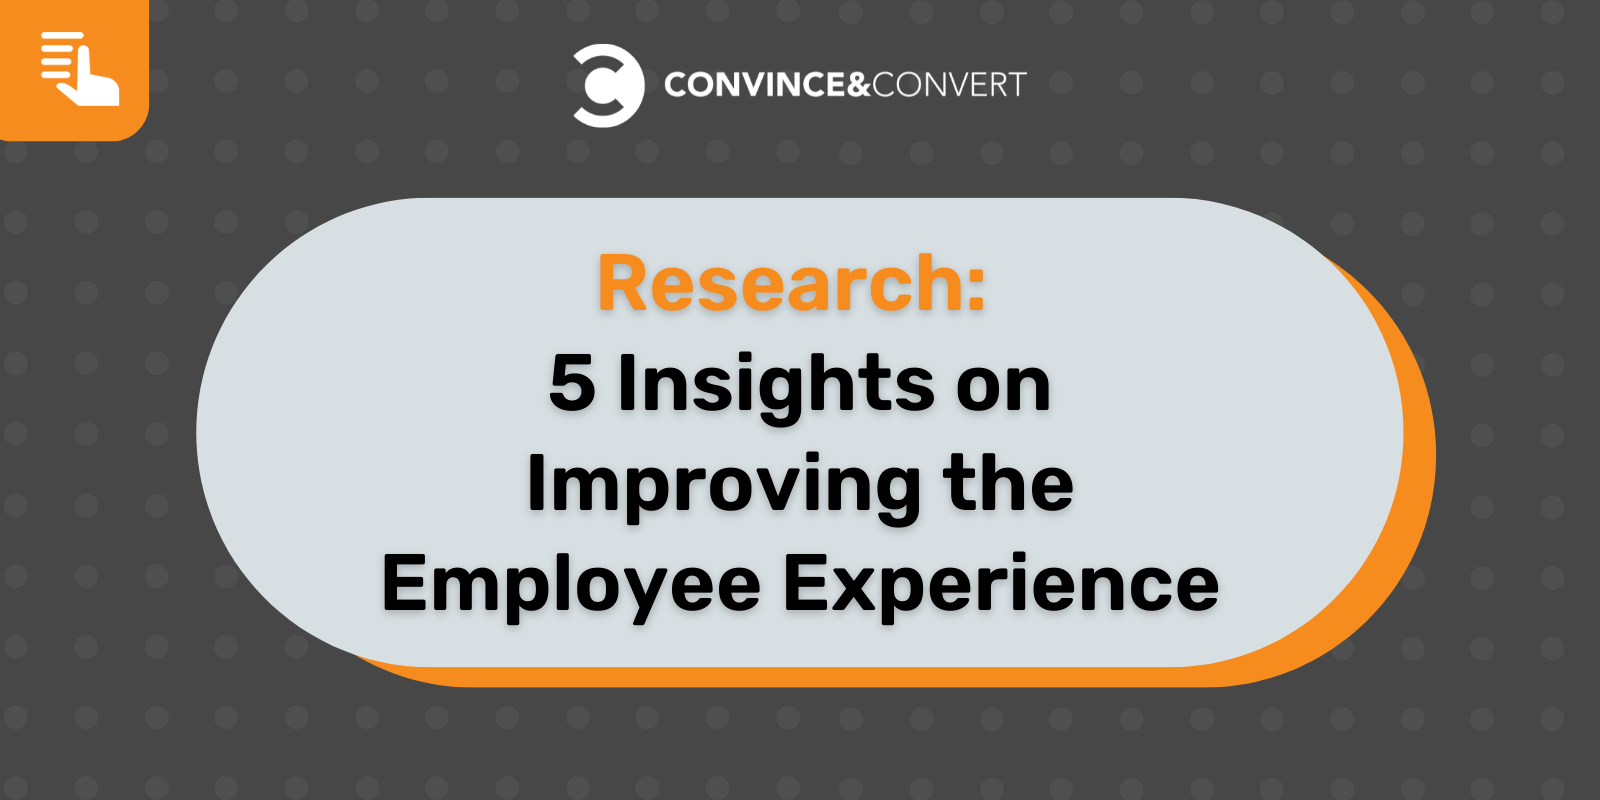 Research: 5 Insights on Improving the Employee Experience